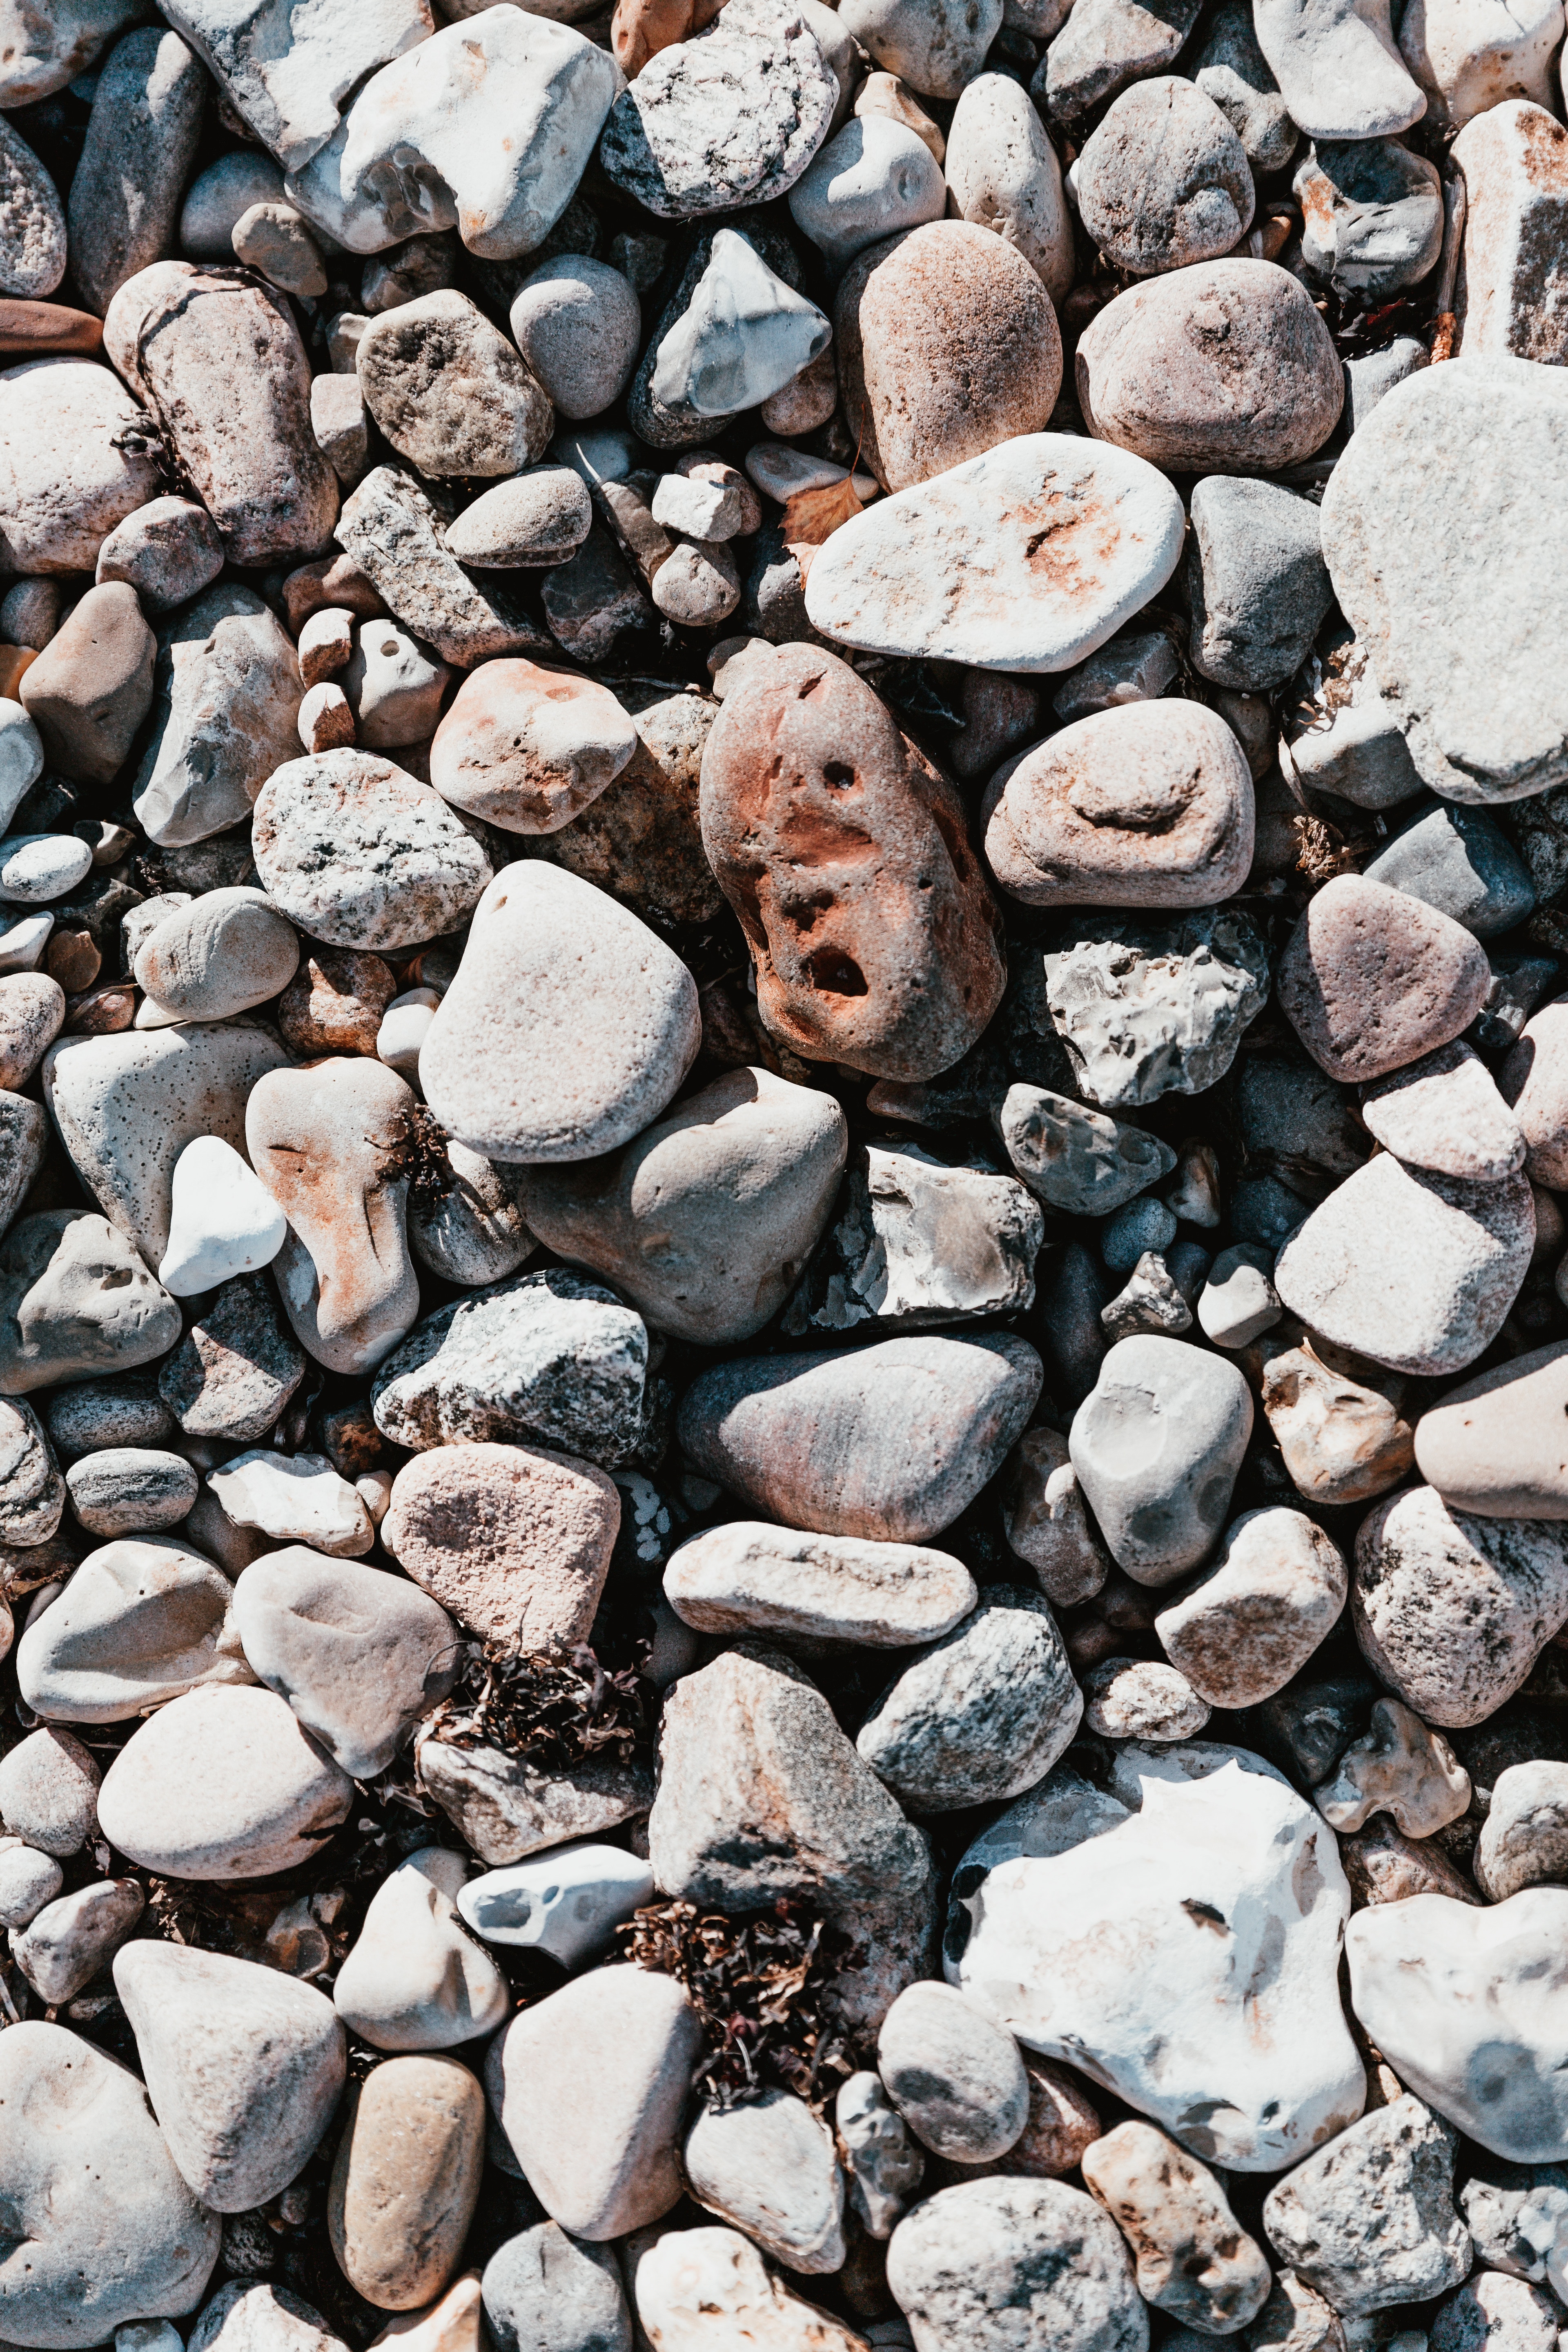 124384 download wallpaper nature, pebble, form, sea stones, seastones screensavers and pictures for free